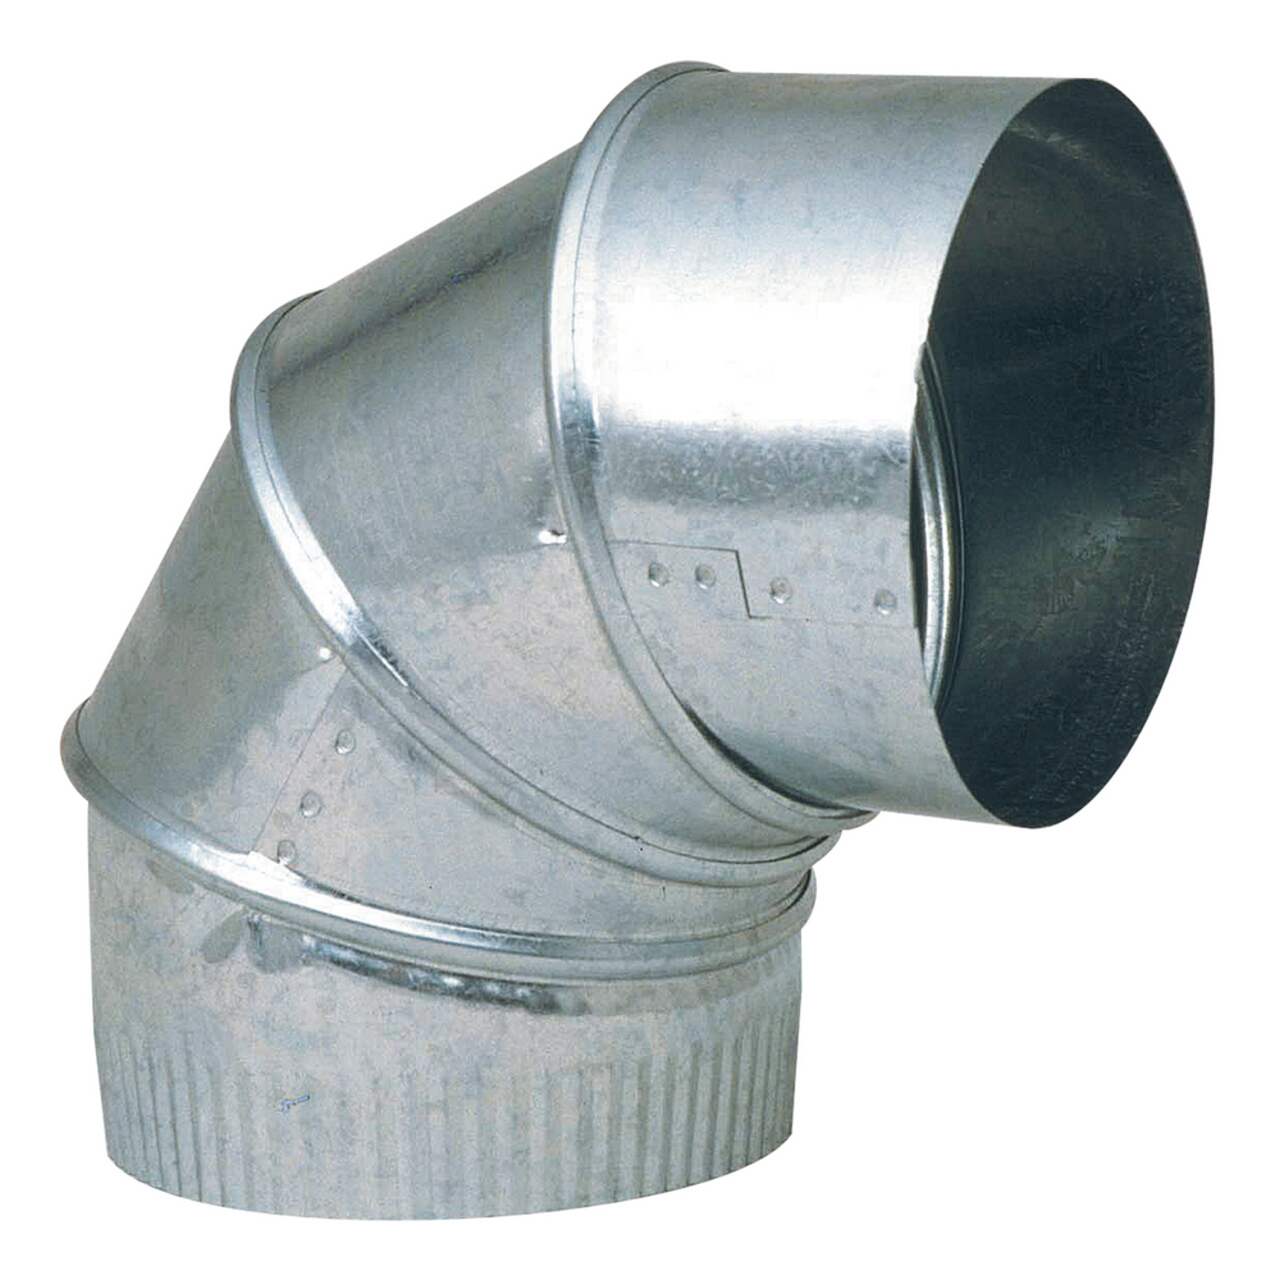 https://media-www.canadiantire.ca/product/fixing/home-environment/home-air-quality-accessories/0642943/pipe-elbow-adjustable-5-x-90-degree-galvanized-a65324a3-5ab1-46fc-b47d-83b46f8e24c9.png?imdensity=1&imwidth=640&impolicy=mZoom